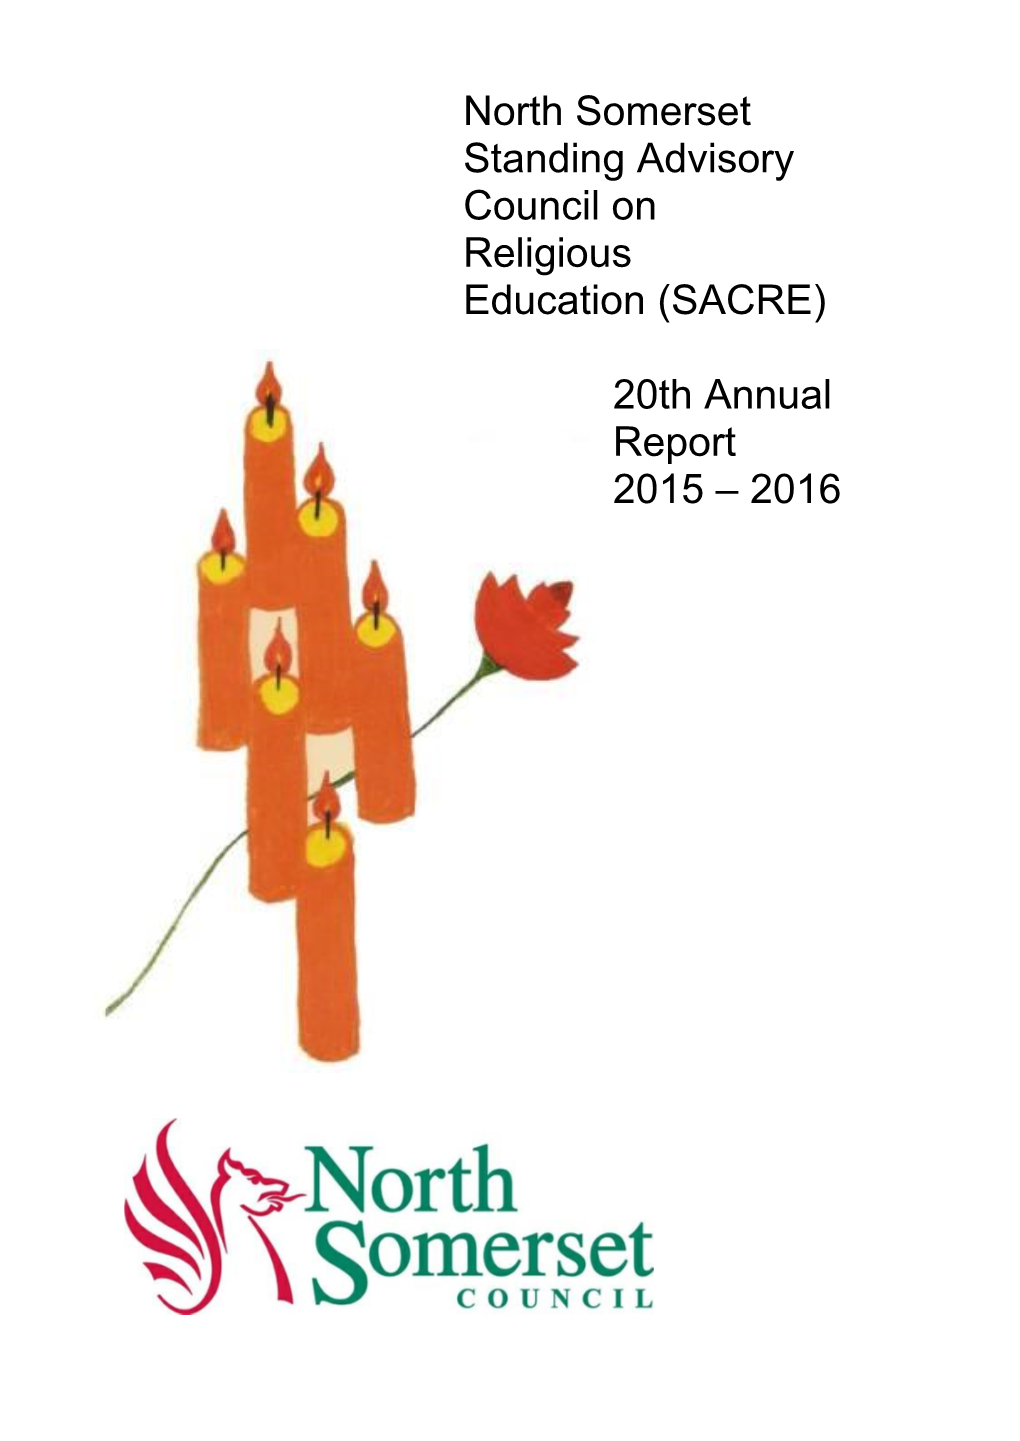 North Somerset Standing Advisory Council on Religious Education (SACRE)